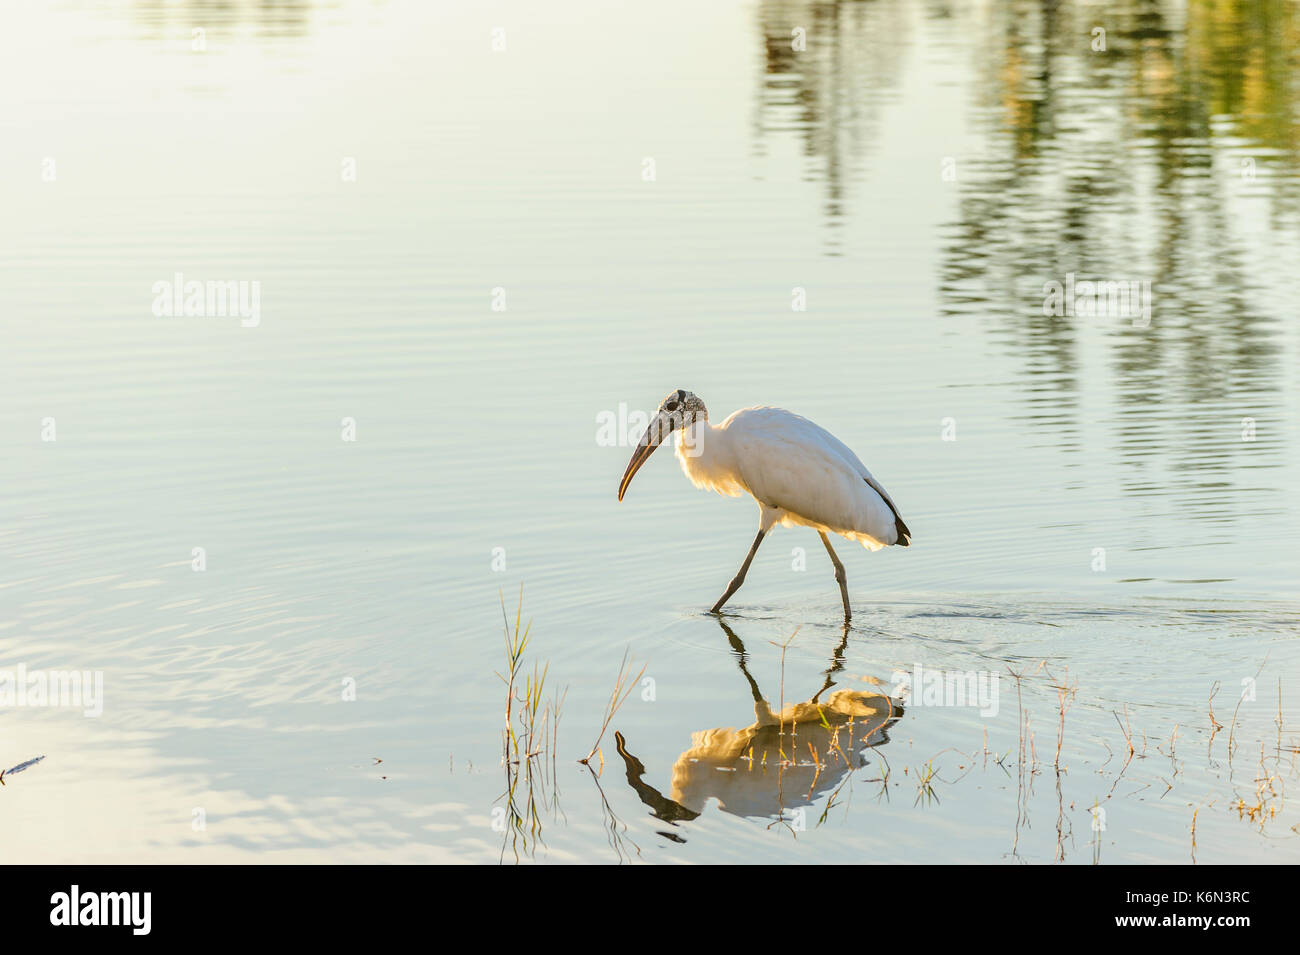 A wading wood stork, Mycteria americana, looking for fish in a west central Florida lake. Stock Photo